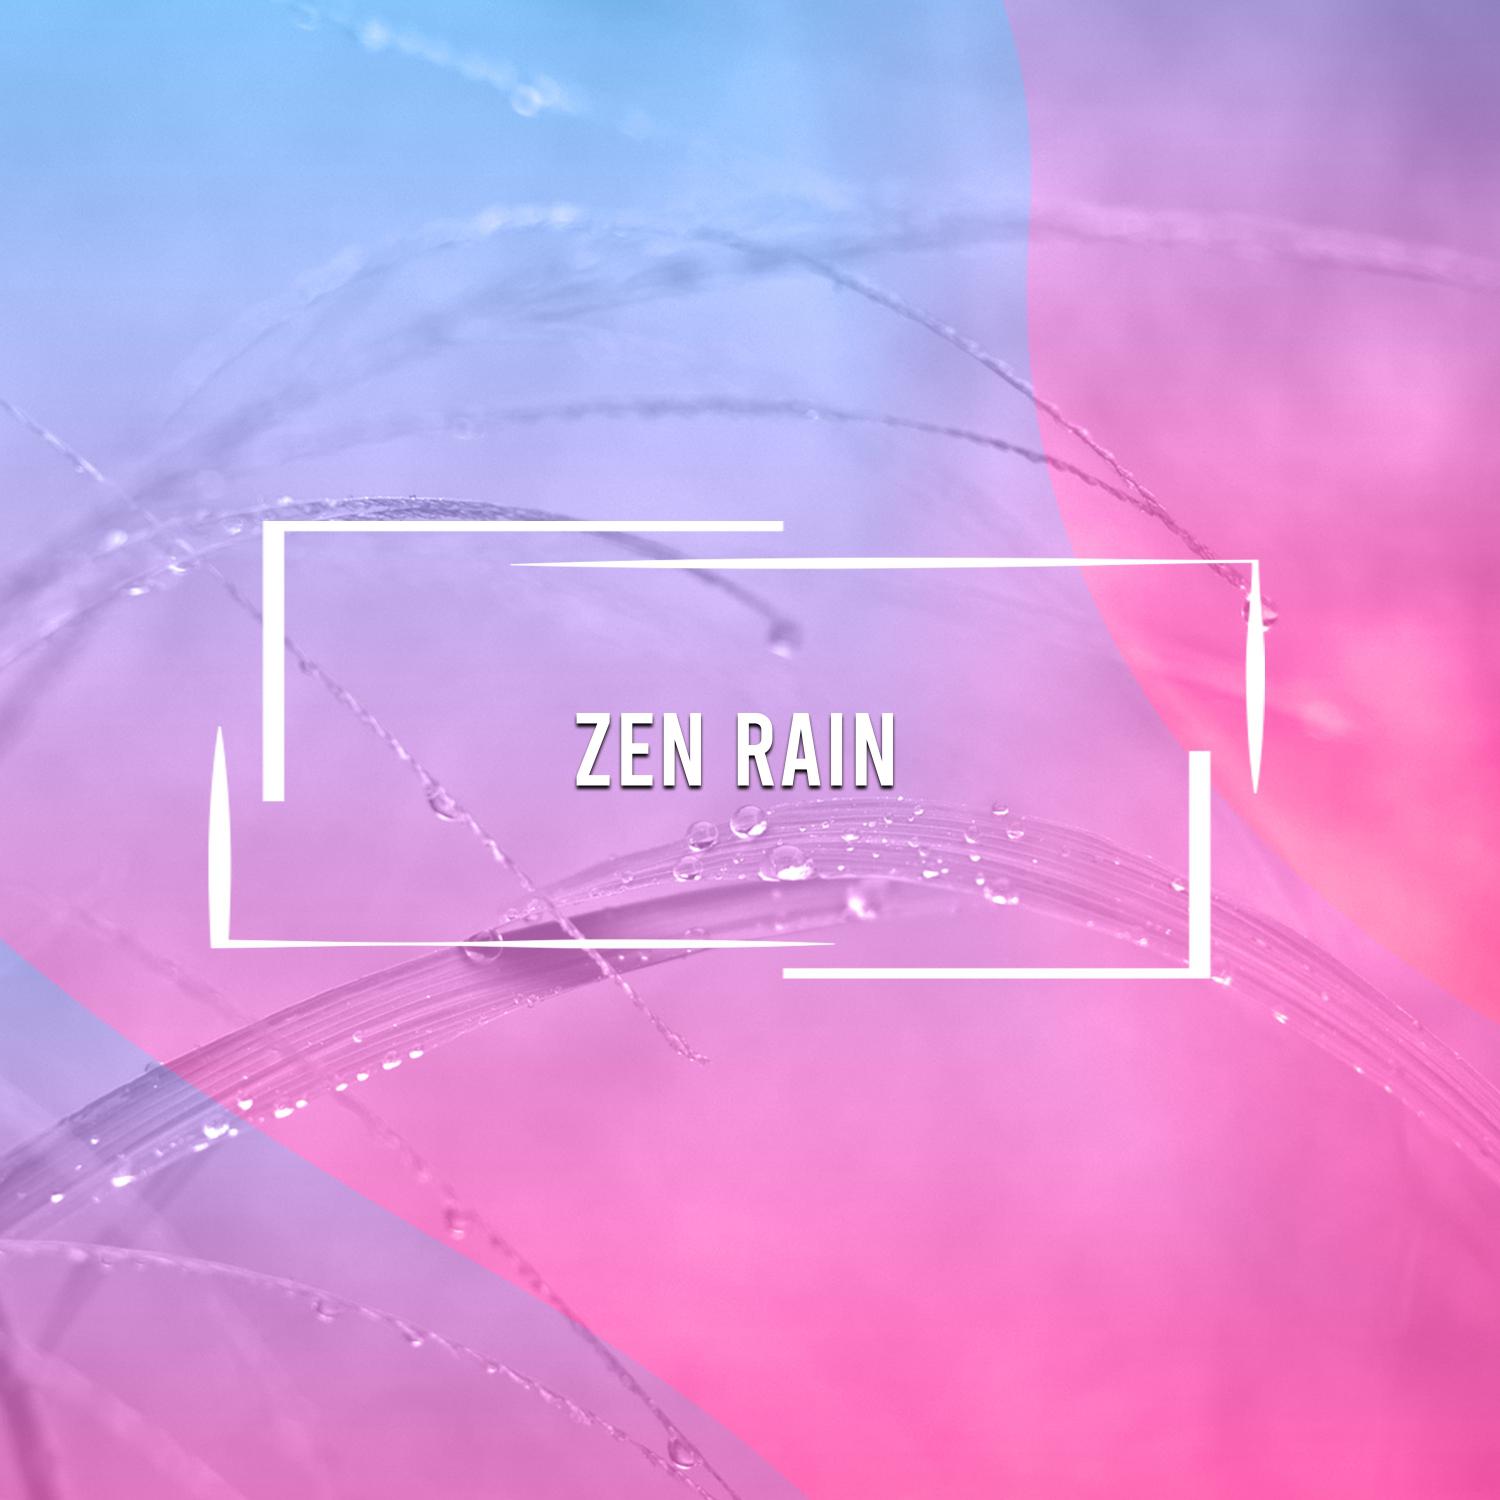 12 Loopable Rain and Nature Sounds for Sleep - Zen Rain Sounds, Meditation Rain Sounds